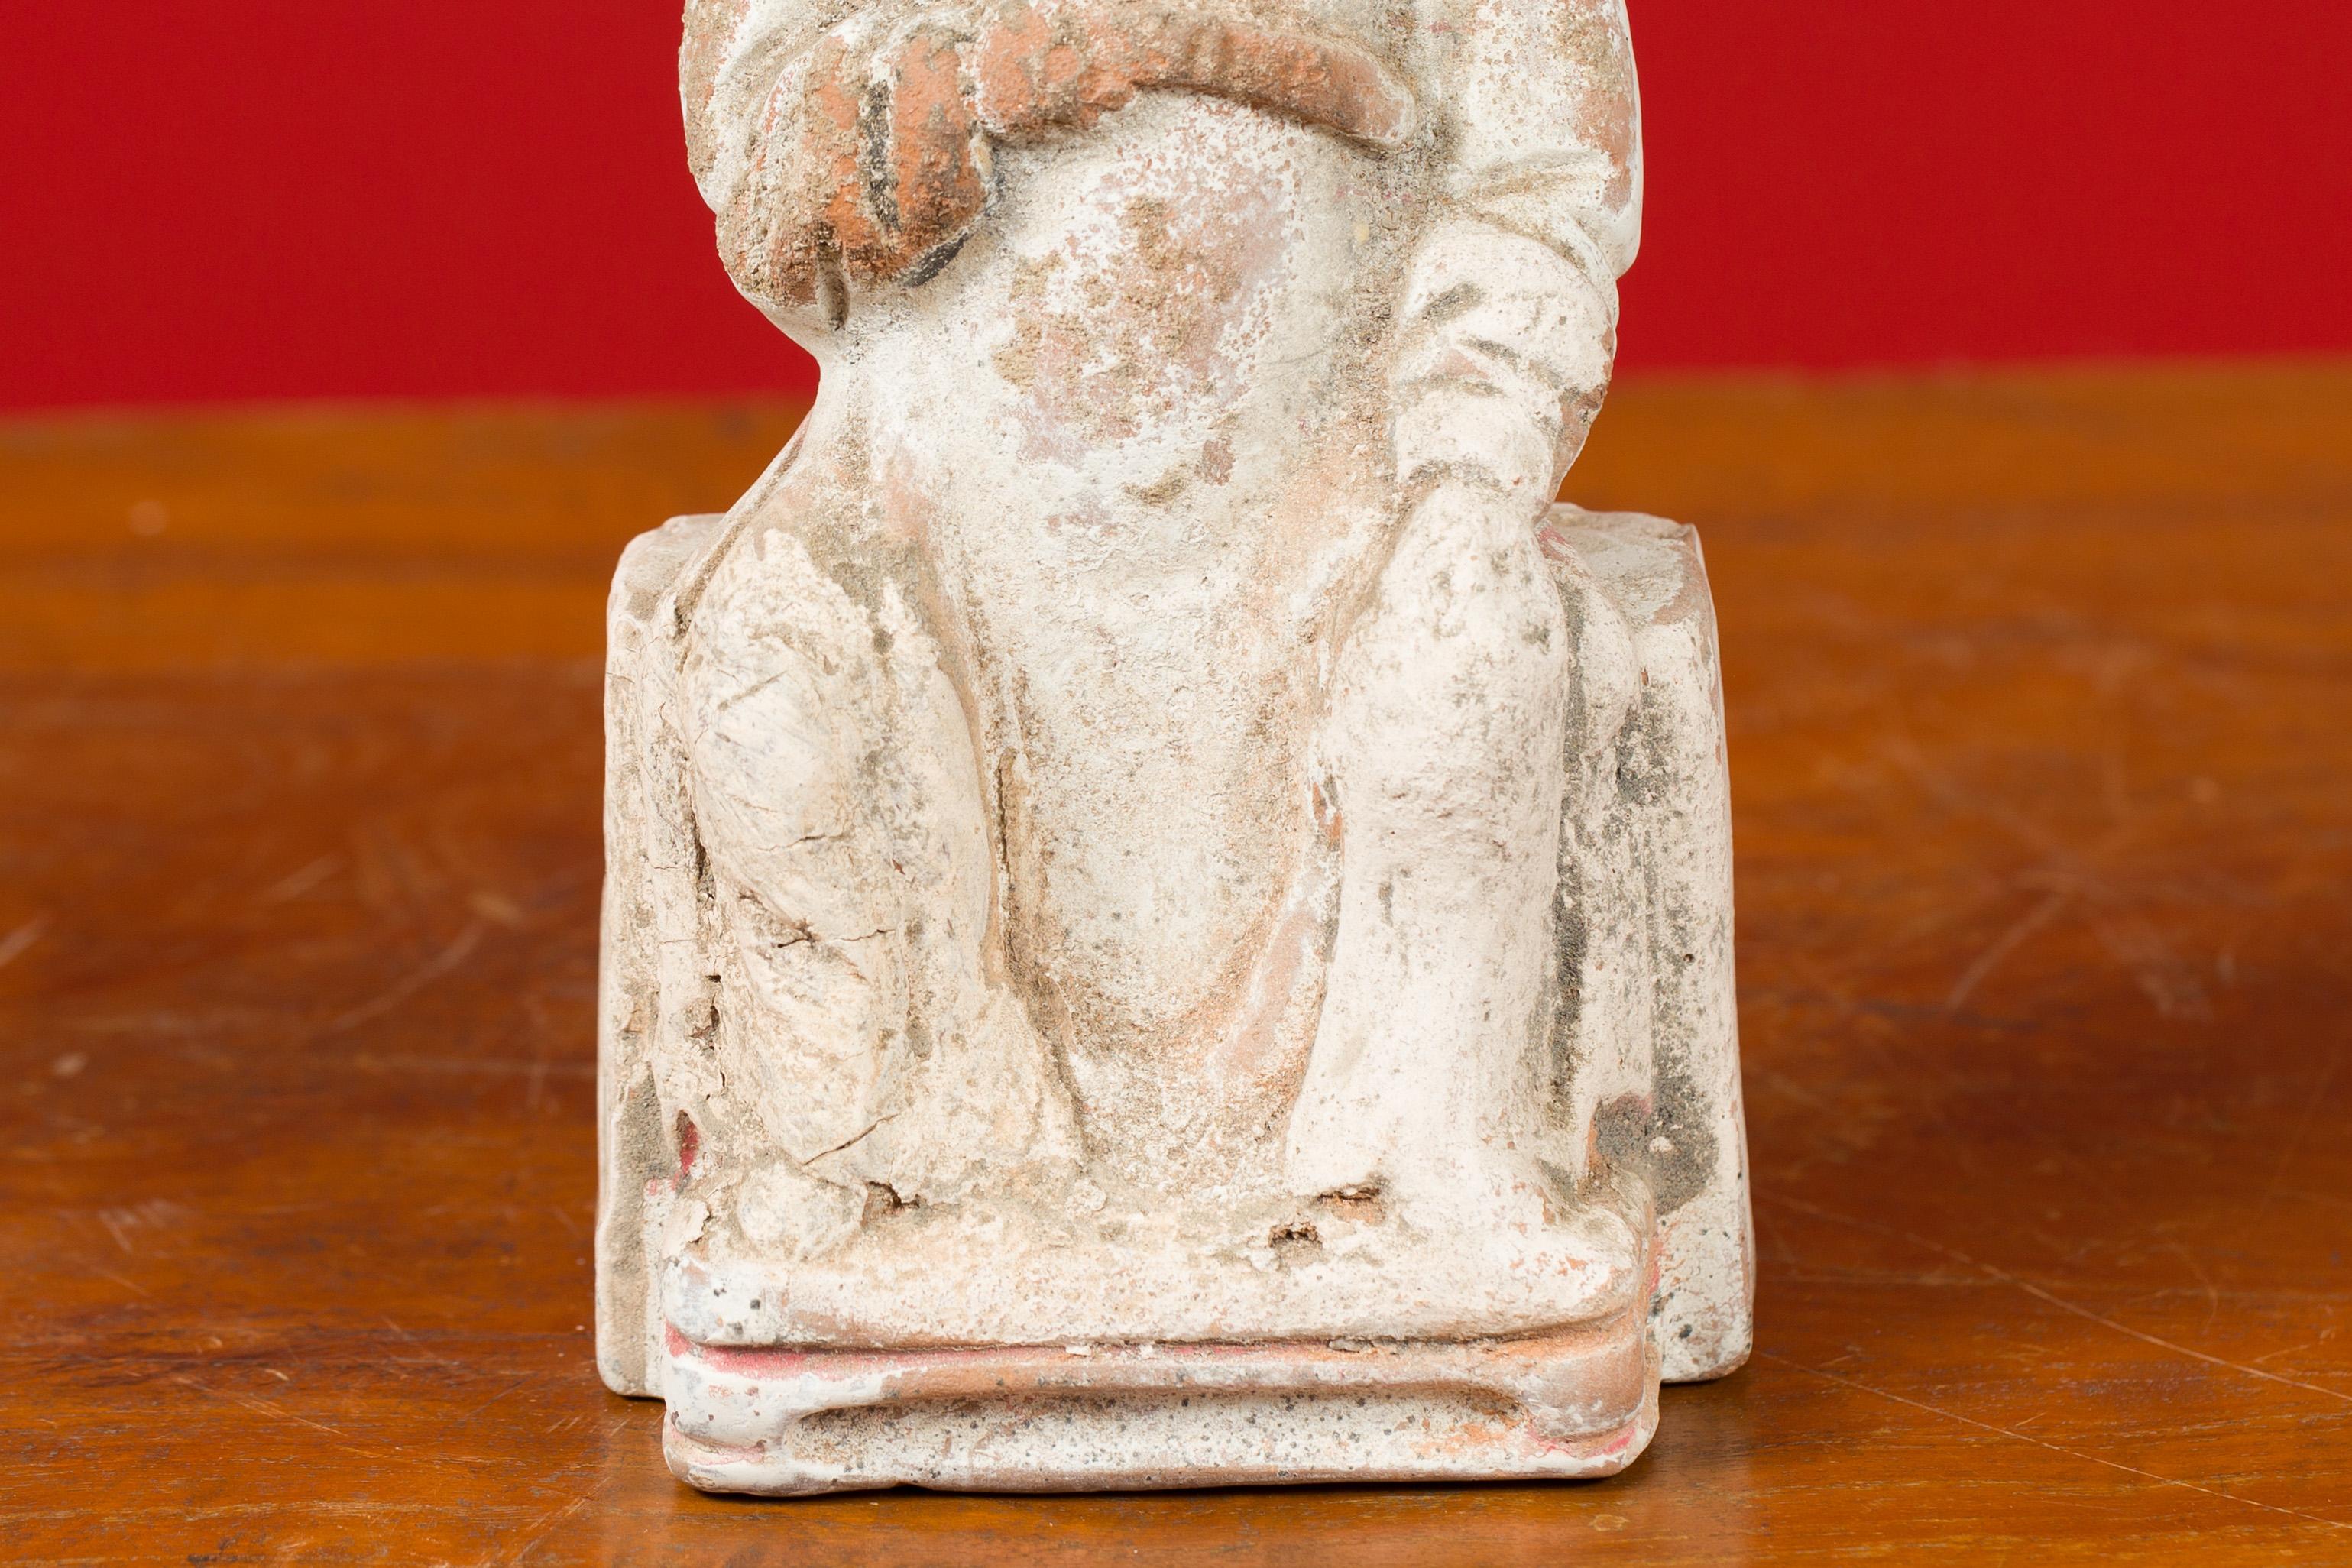 Chinese Han Dynasty Period Terracotta Dignitary Figure with White and Red Paint 1